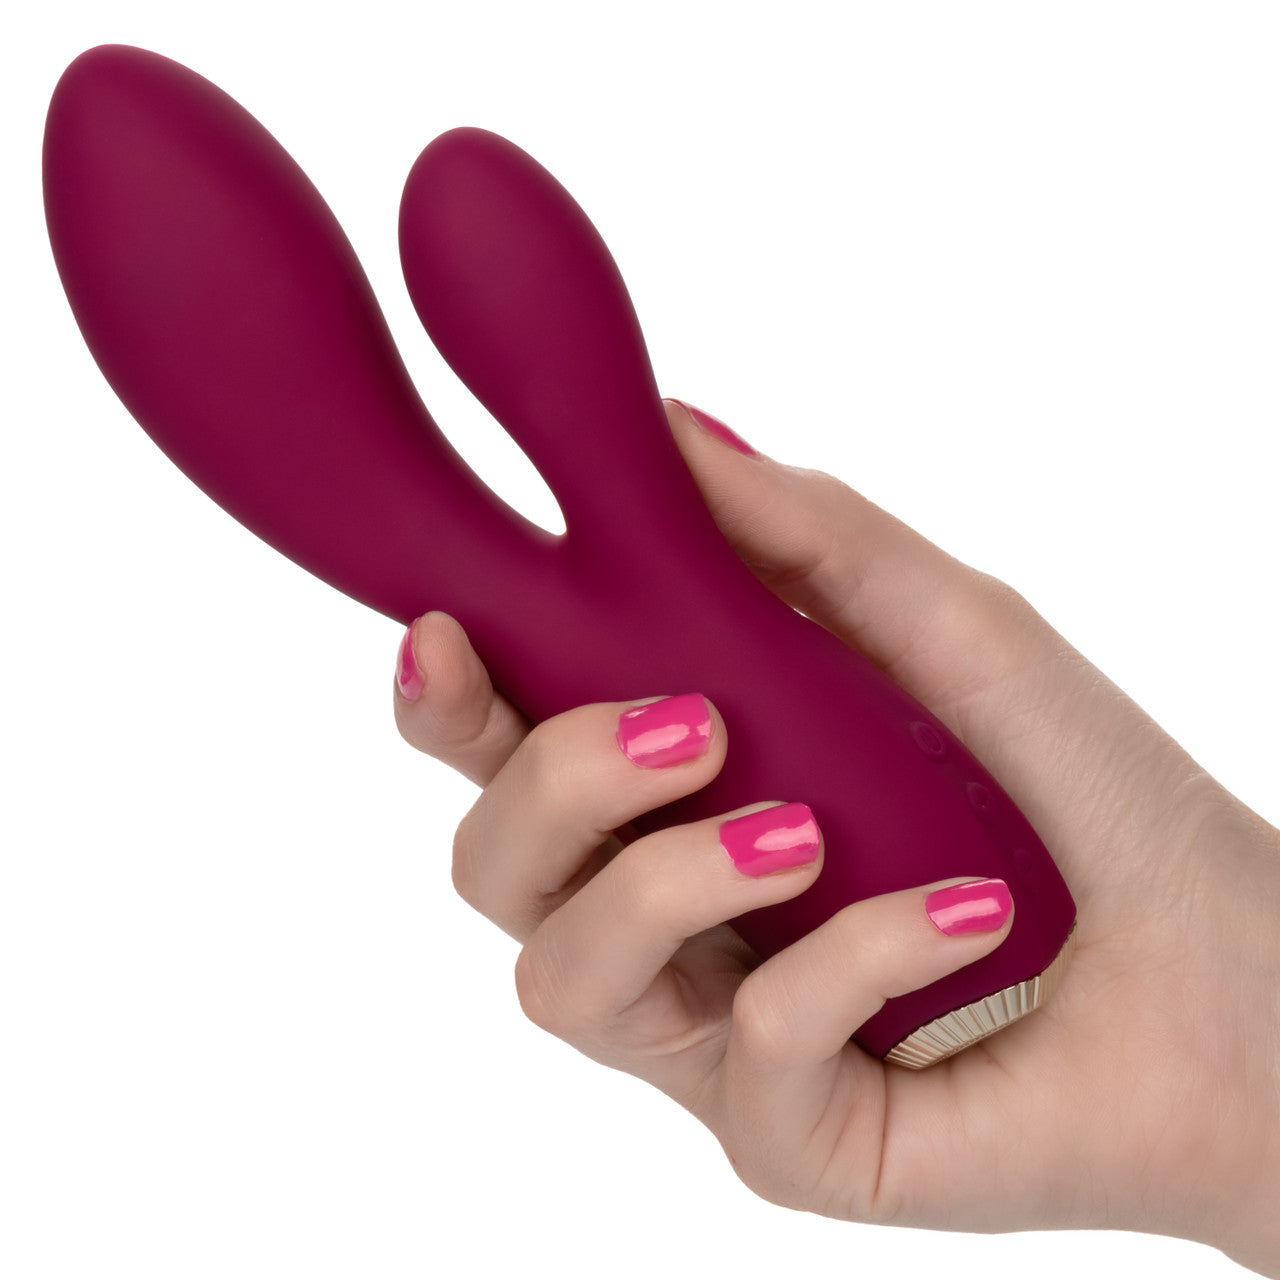 Uncorked Cabernet 10-Function Rechargeable Silicone Rabbit Vibrator